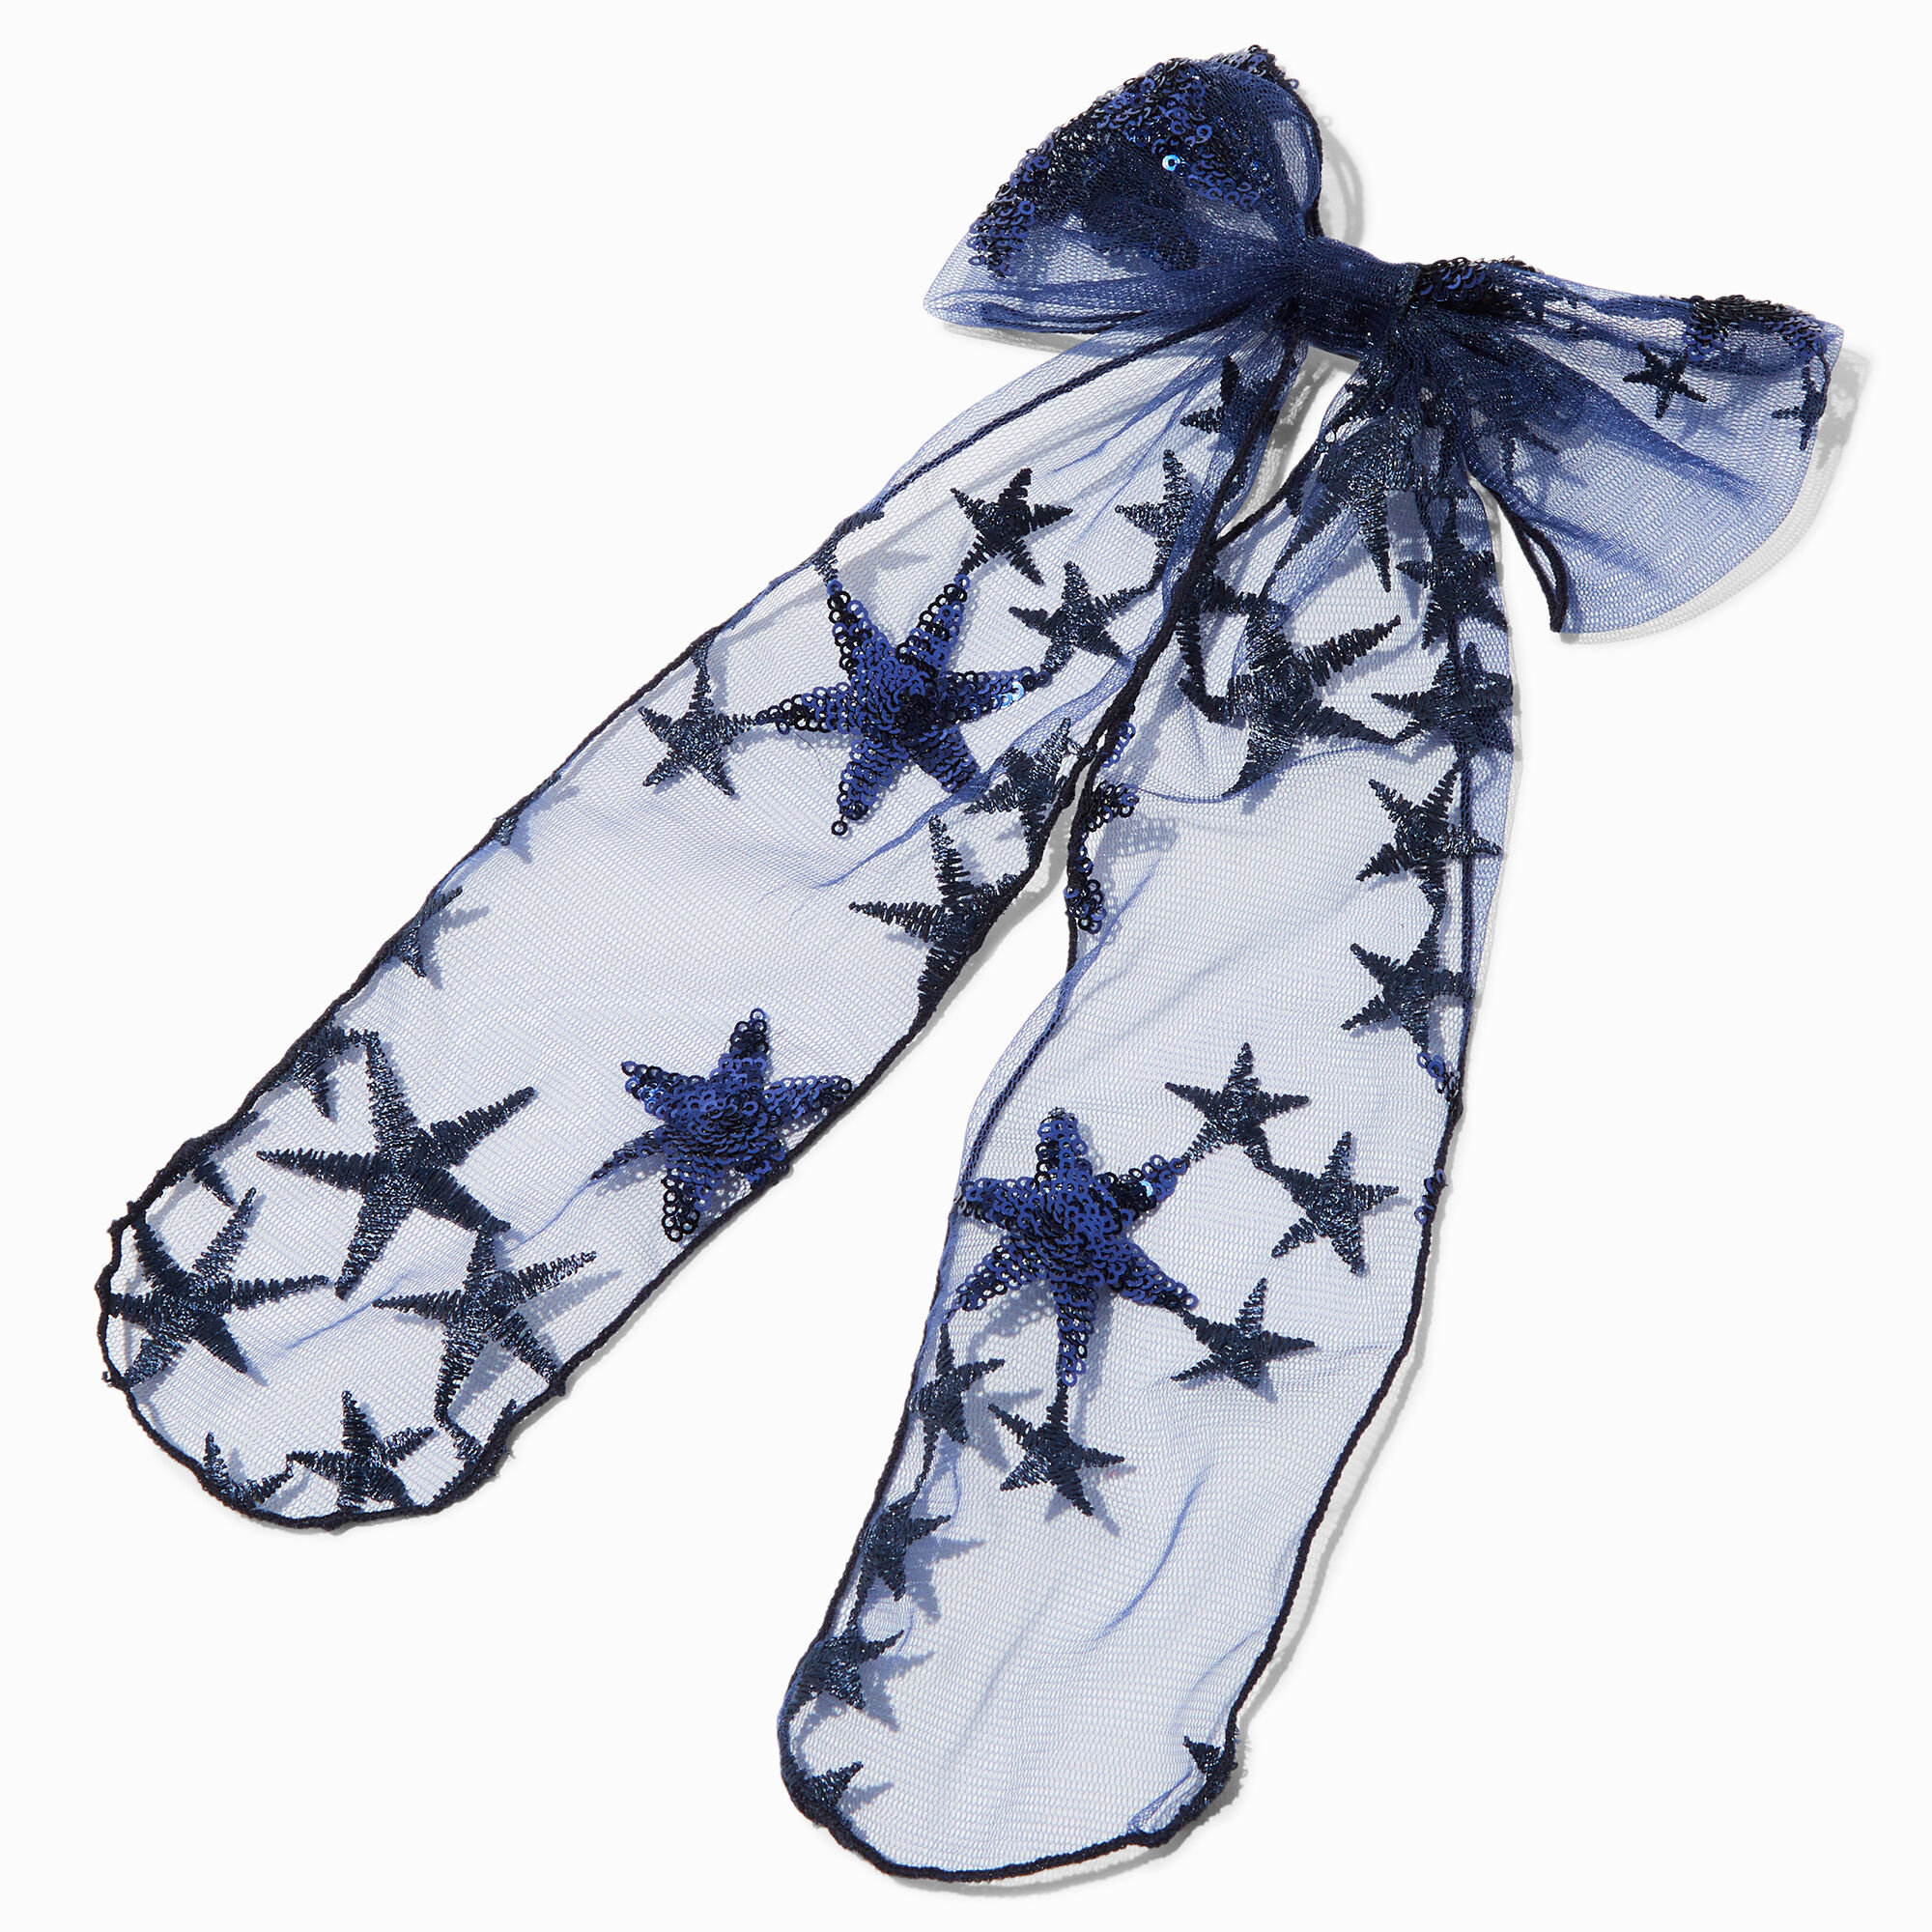 View Claires Sequin Star Large Bow Hair Clip Navy information